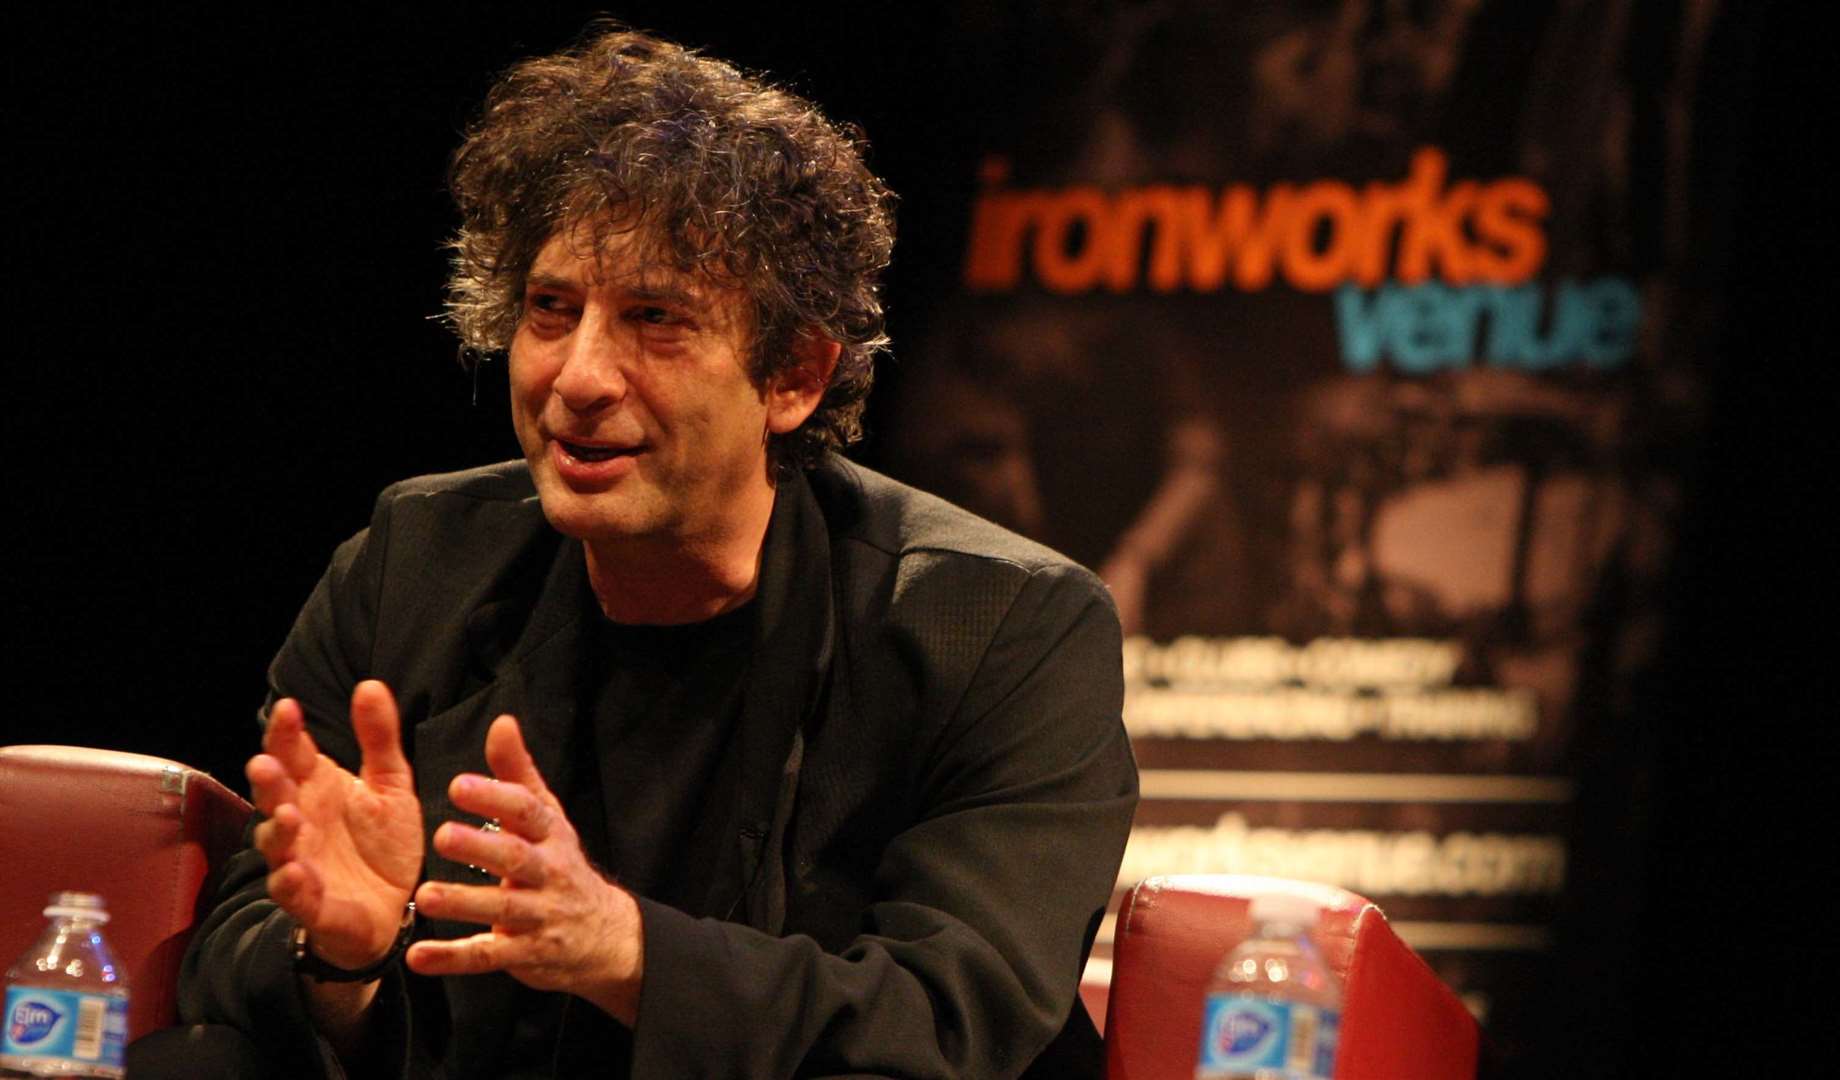 Neil Gaiman during a past visit to the Ironworks in Inverness.